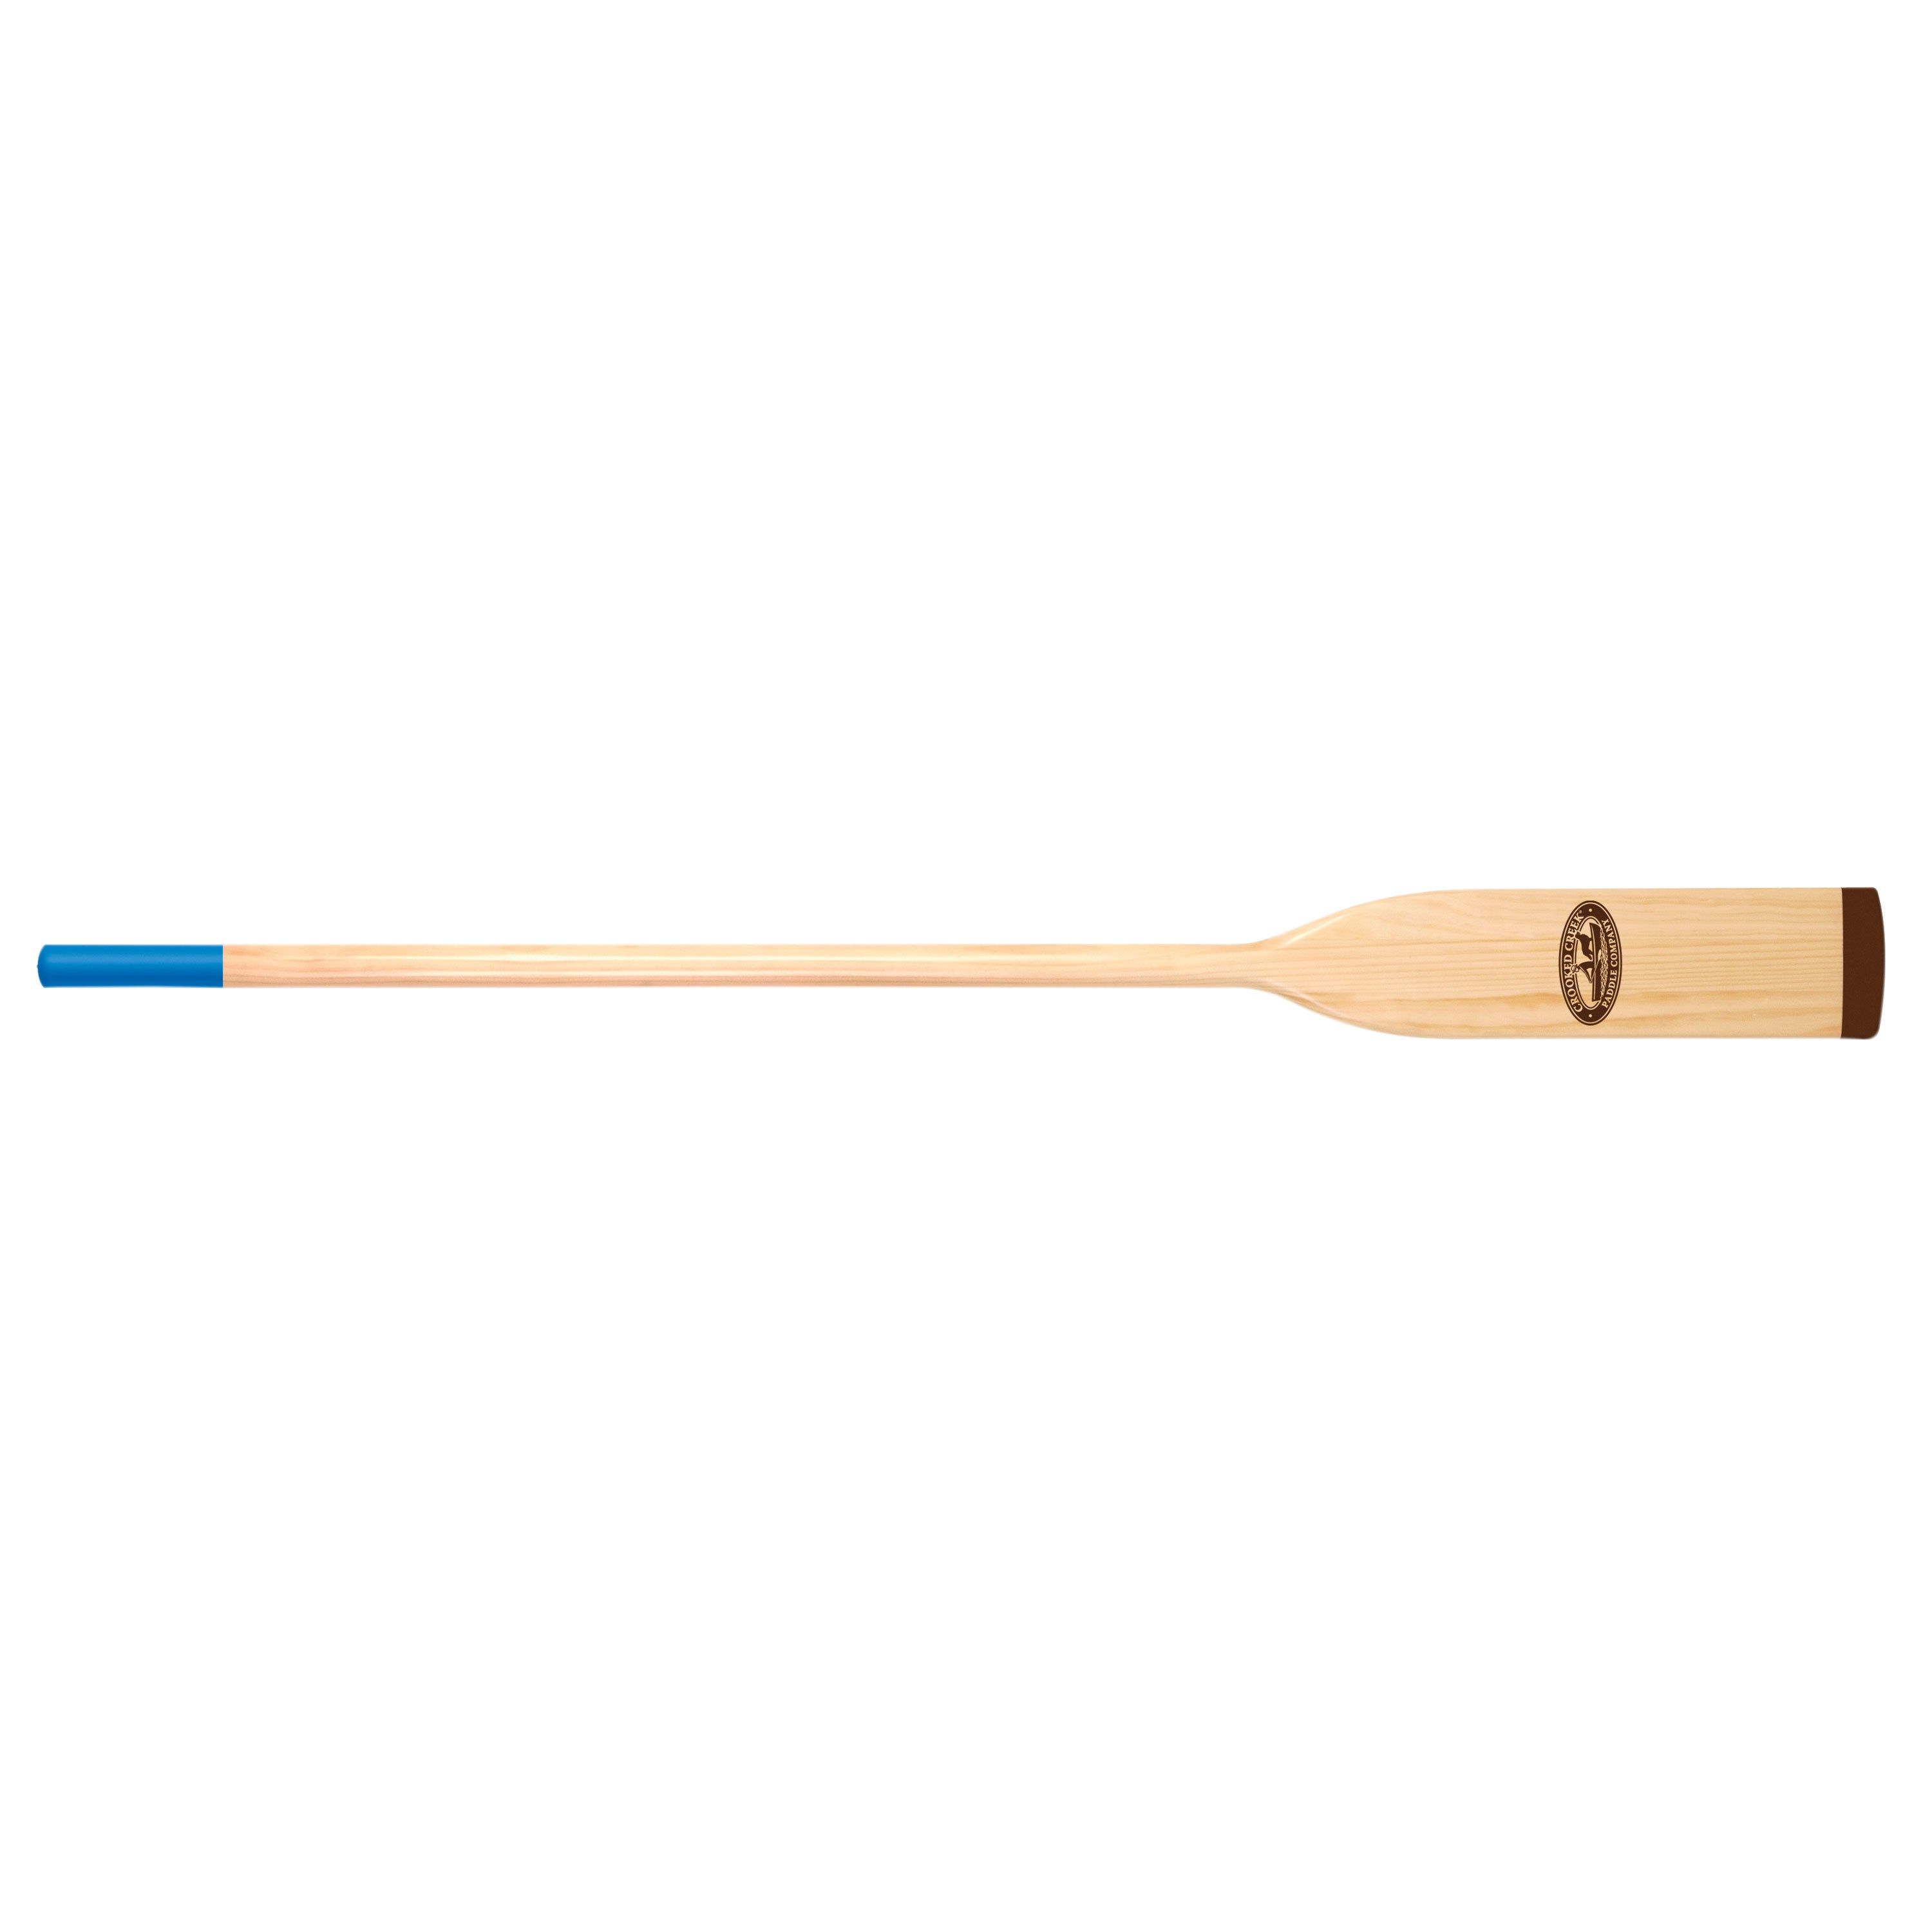 Crooked Creek C10760 Natural Finish Wood Oar with Comfort Grip - 6'